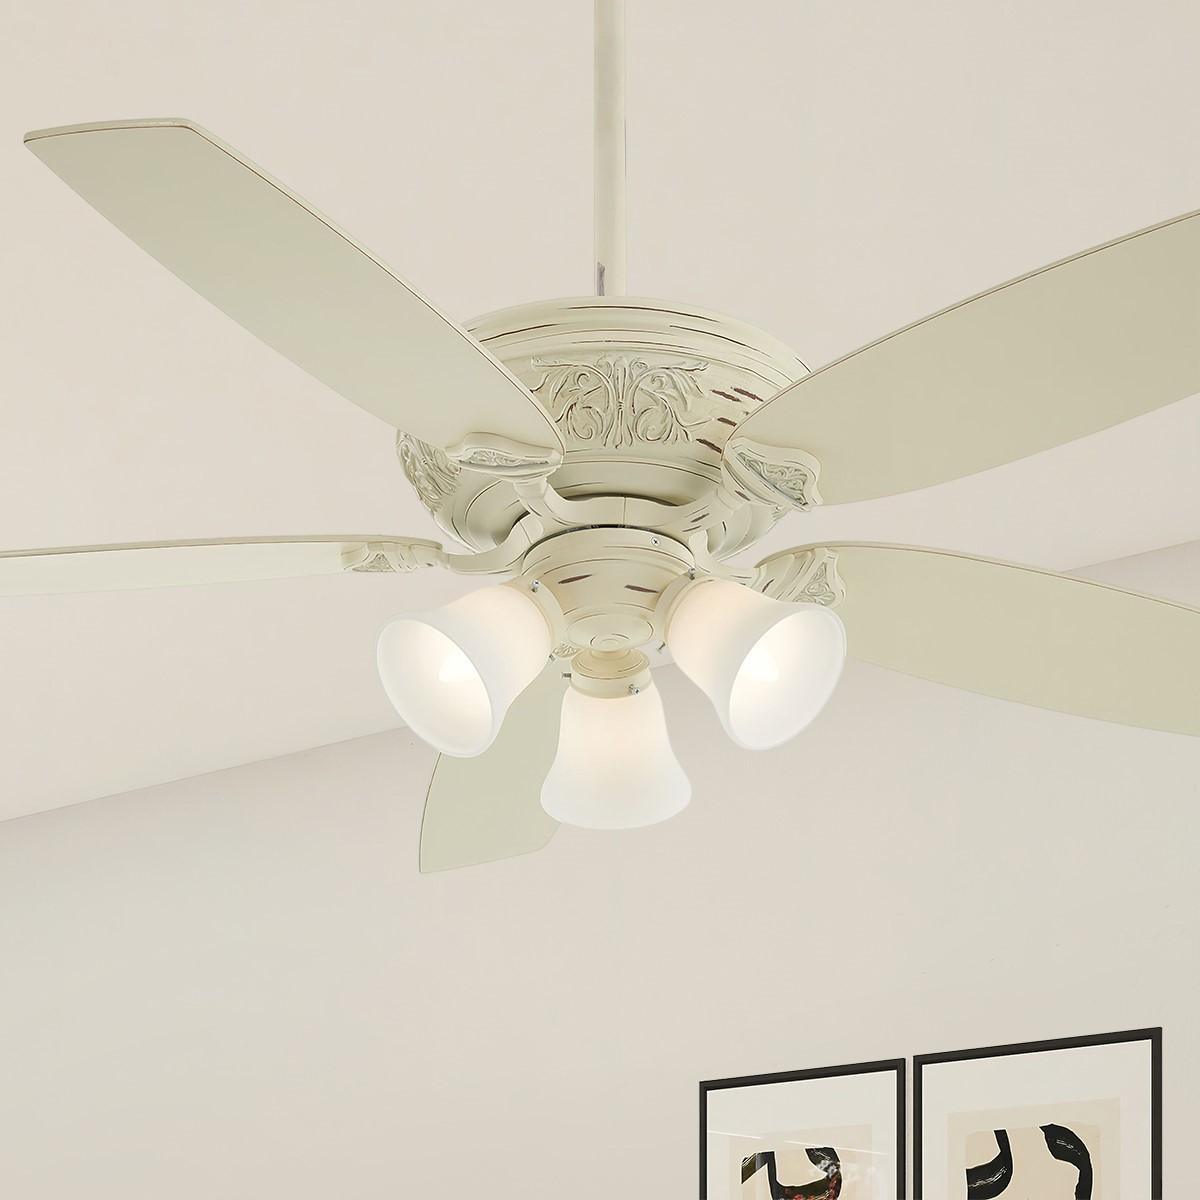 Classica 54 Inch Ceiling Fan With Light And Remote, Provencal Blanc Finish